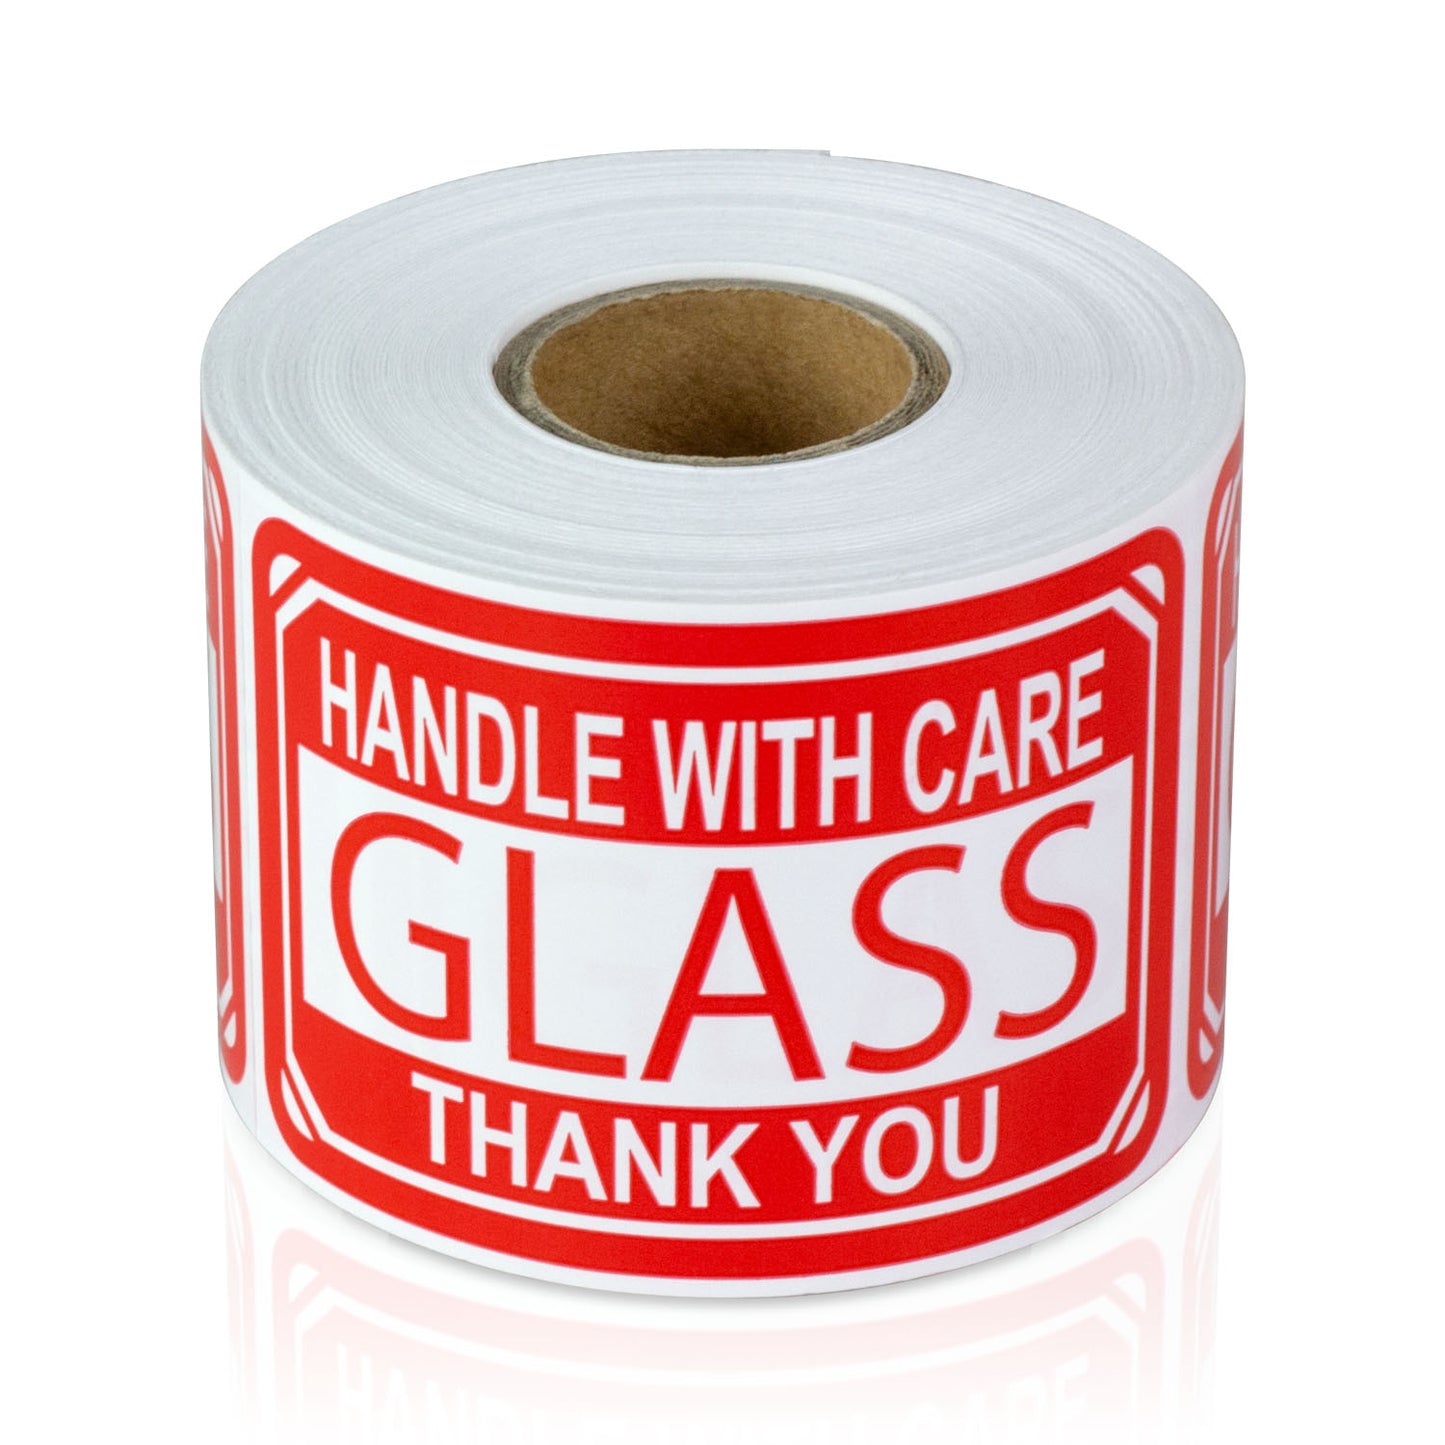 3 x 2 inch | Shipping & Handling: Glass, Handle with Care Stickers